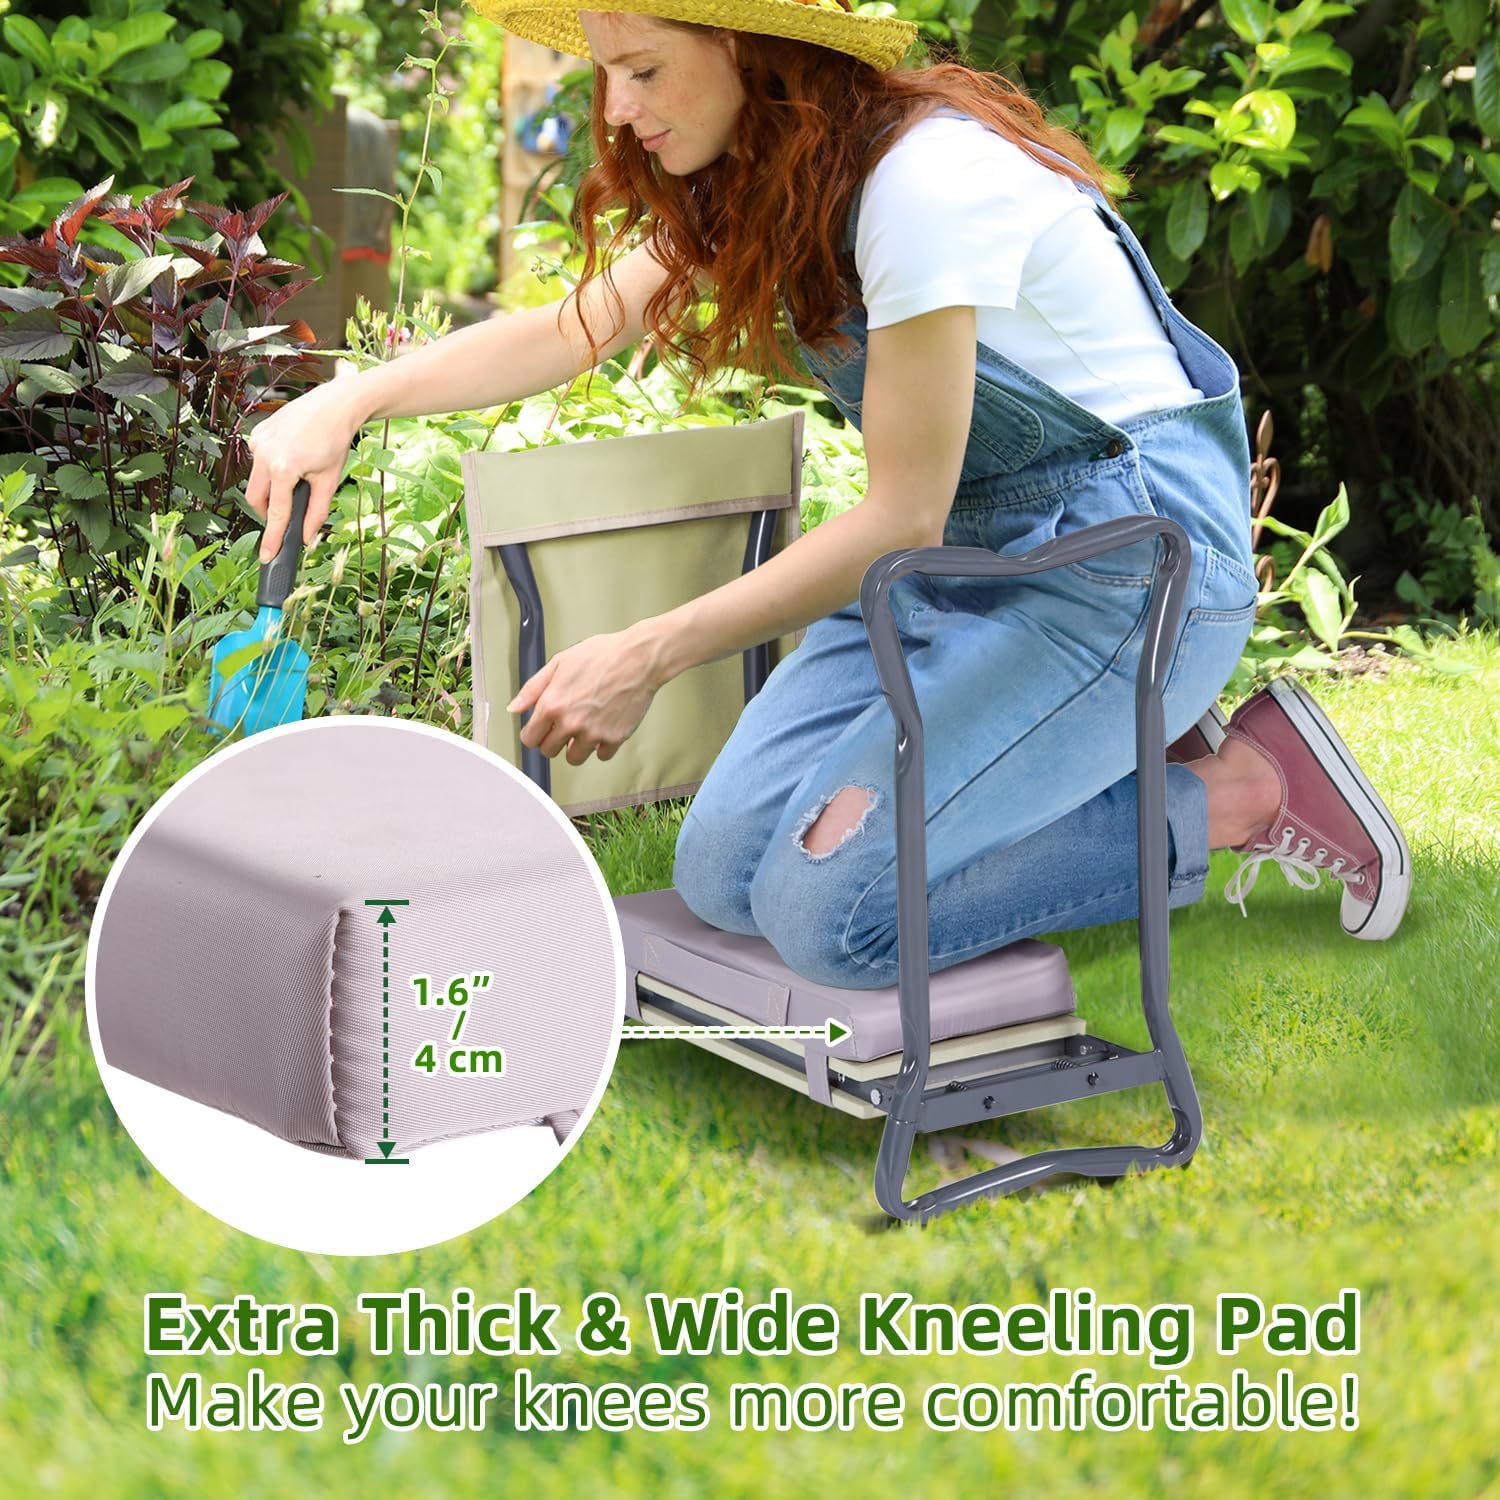 Ohuhu Upgraded Garden Kneeler and Seat 2-in-1 Foldable Gardening Stool with Detachable Soft Kneeling Pad, Garden Bench Heavy Duty with Large Tools Bag and Pouch, Gifts for Women Men Seniors Gardener